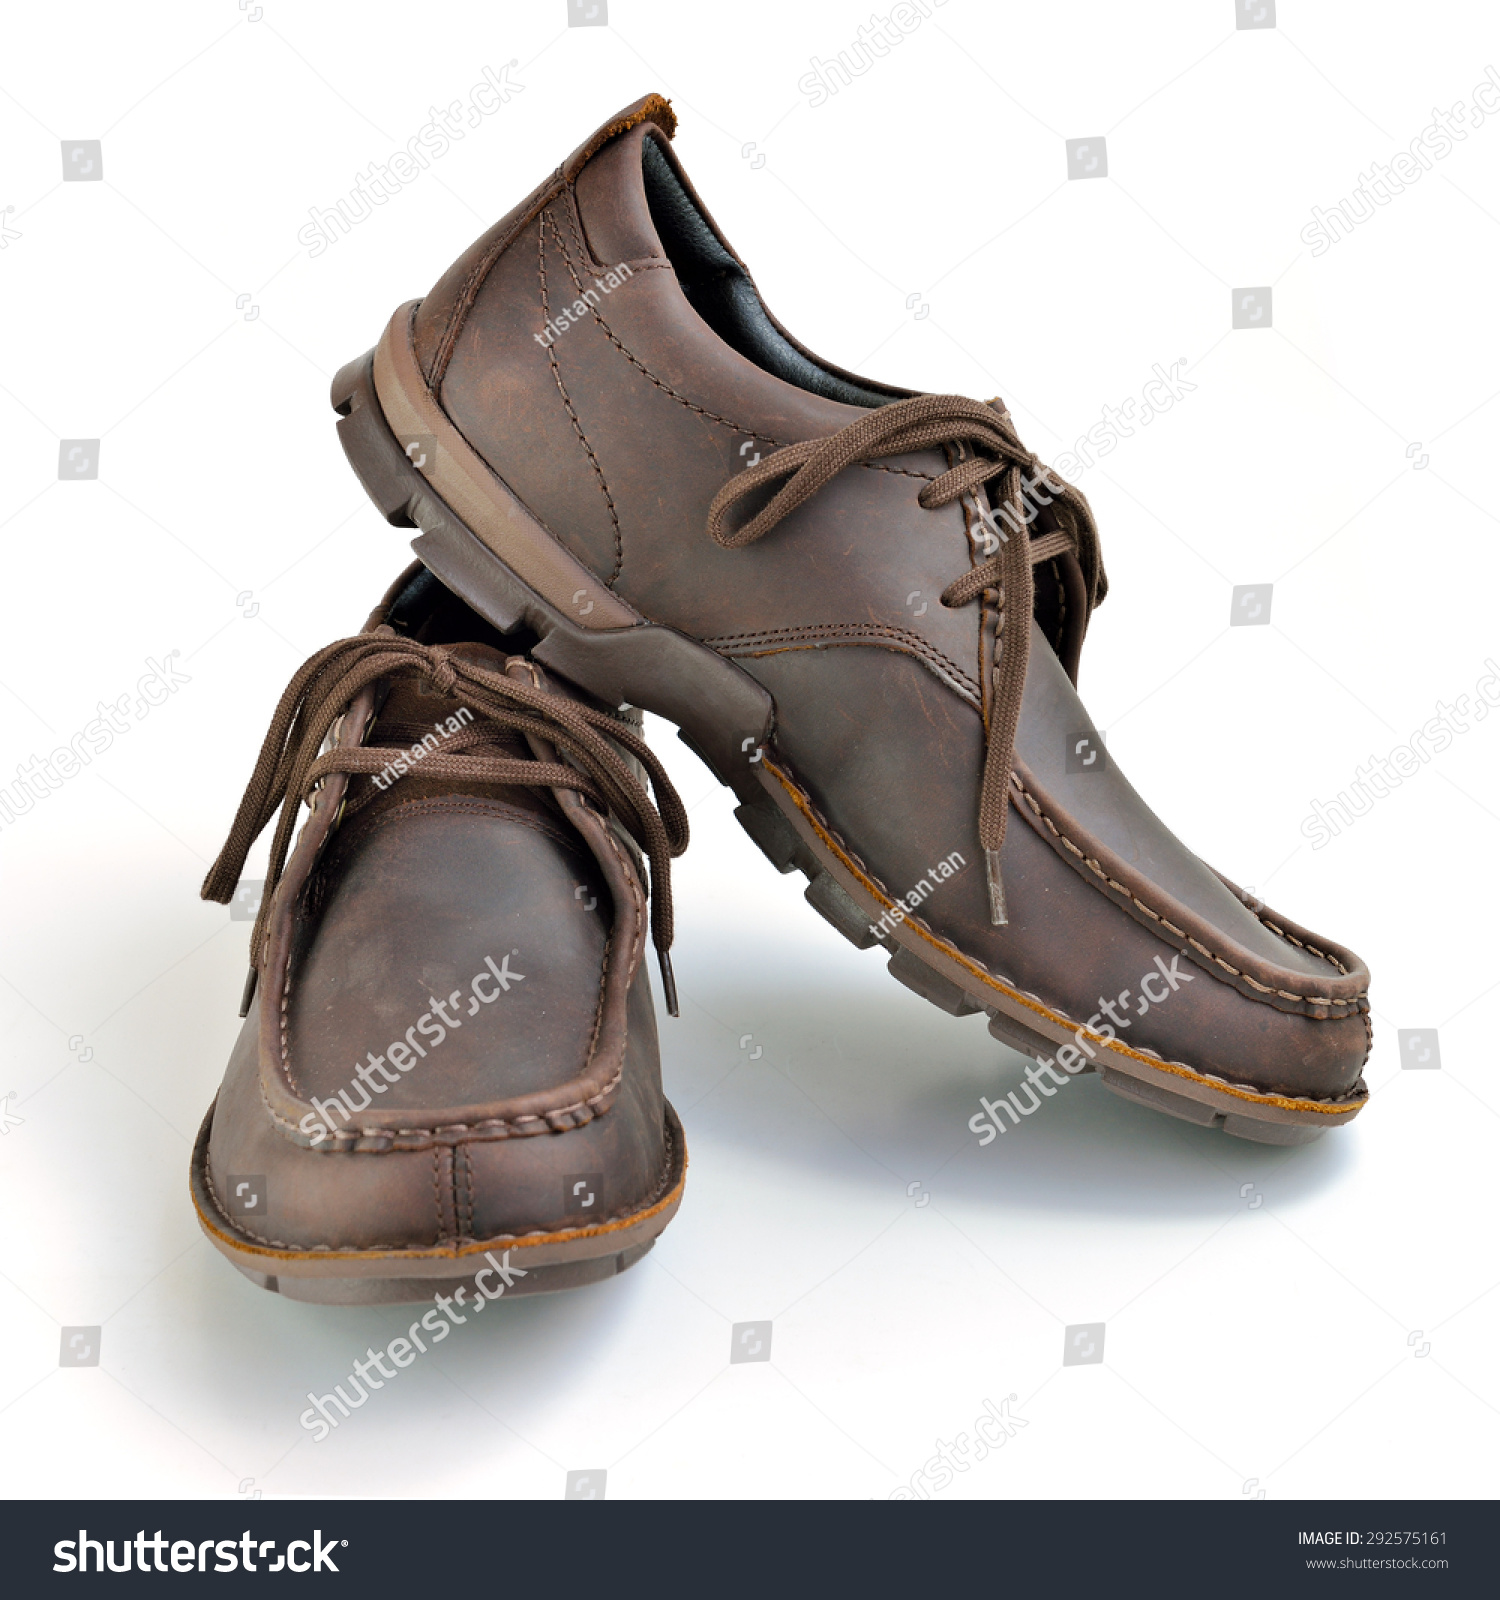 Brown Casual Leather Man Shoes Isolated Stock Photo 292575161 ...